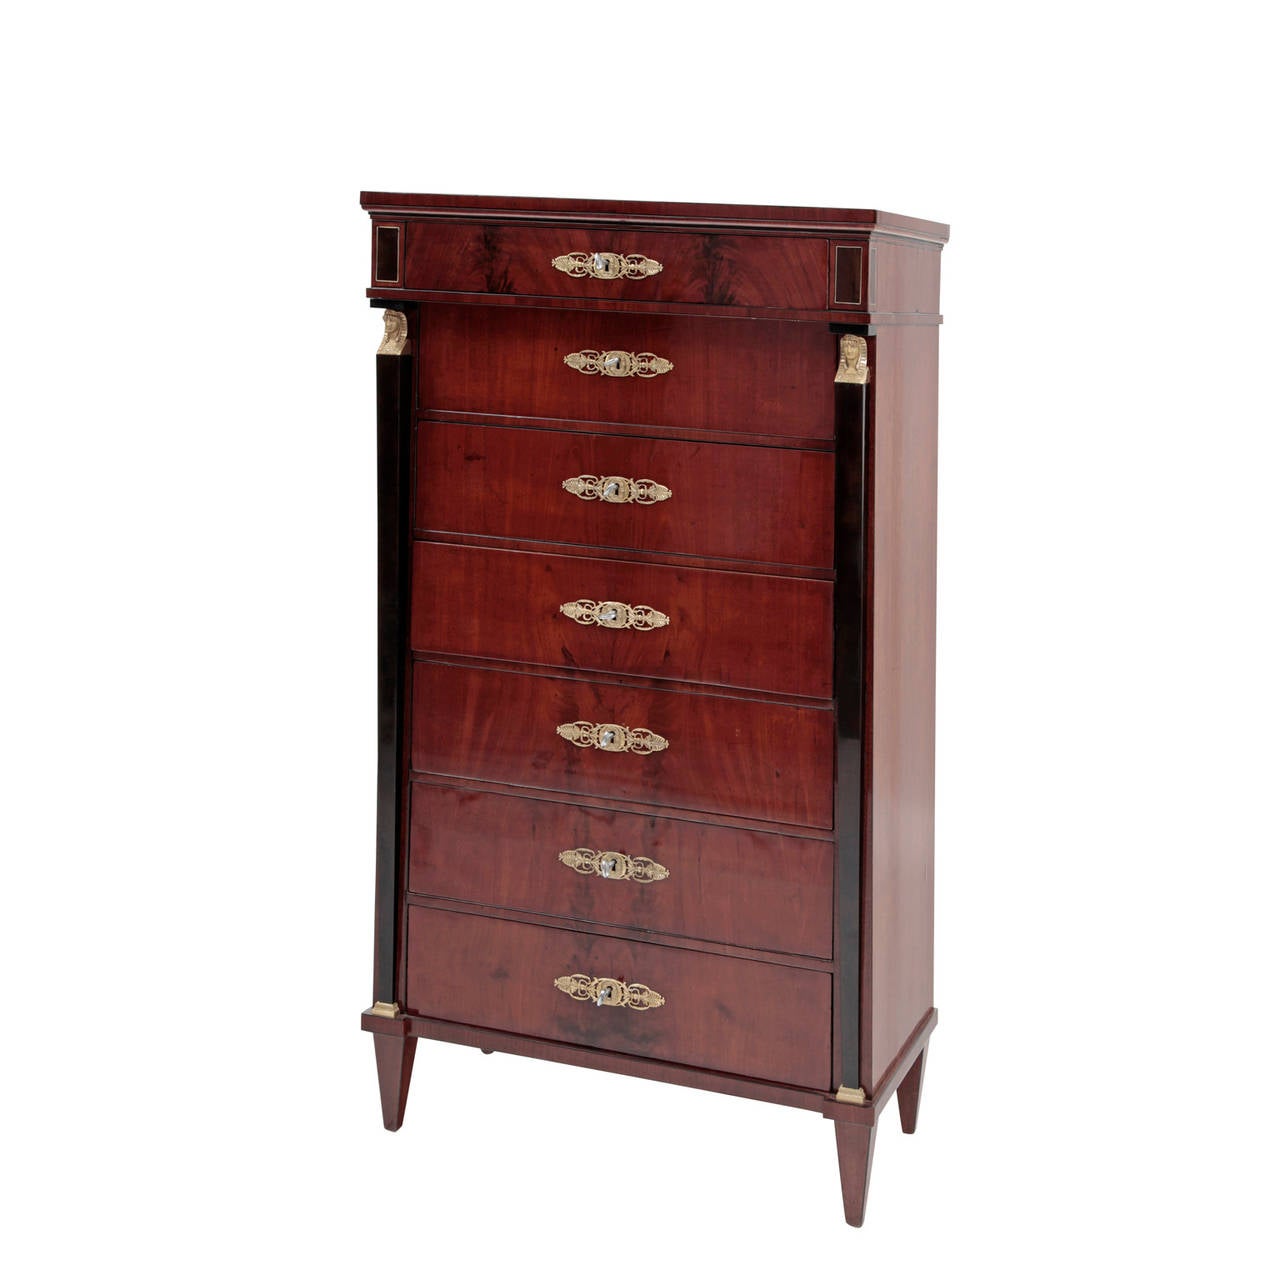 19th Century Vienna Empire Chest of Drawers or Semainaire from the 1810s